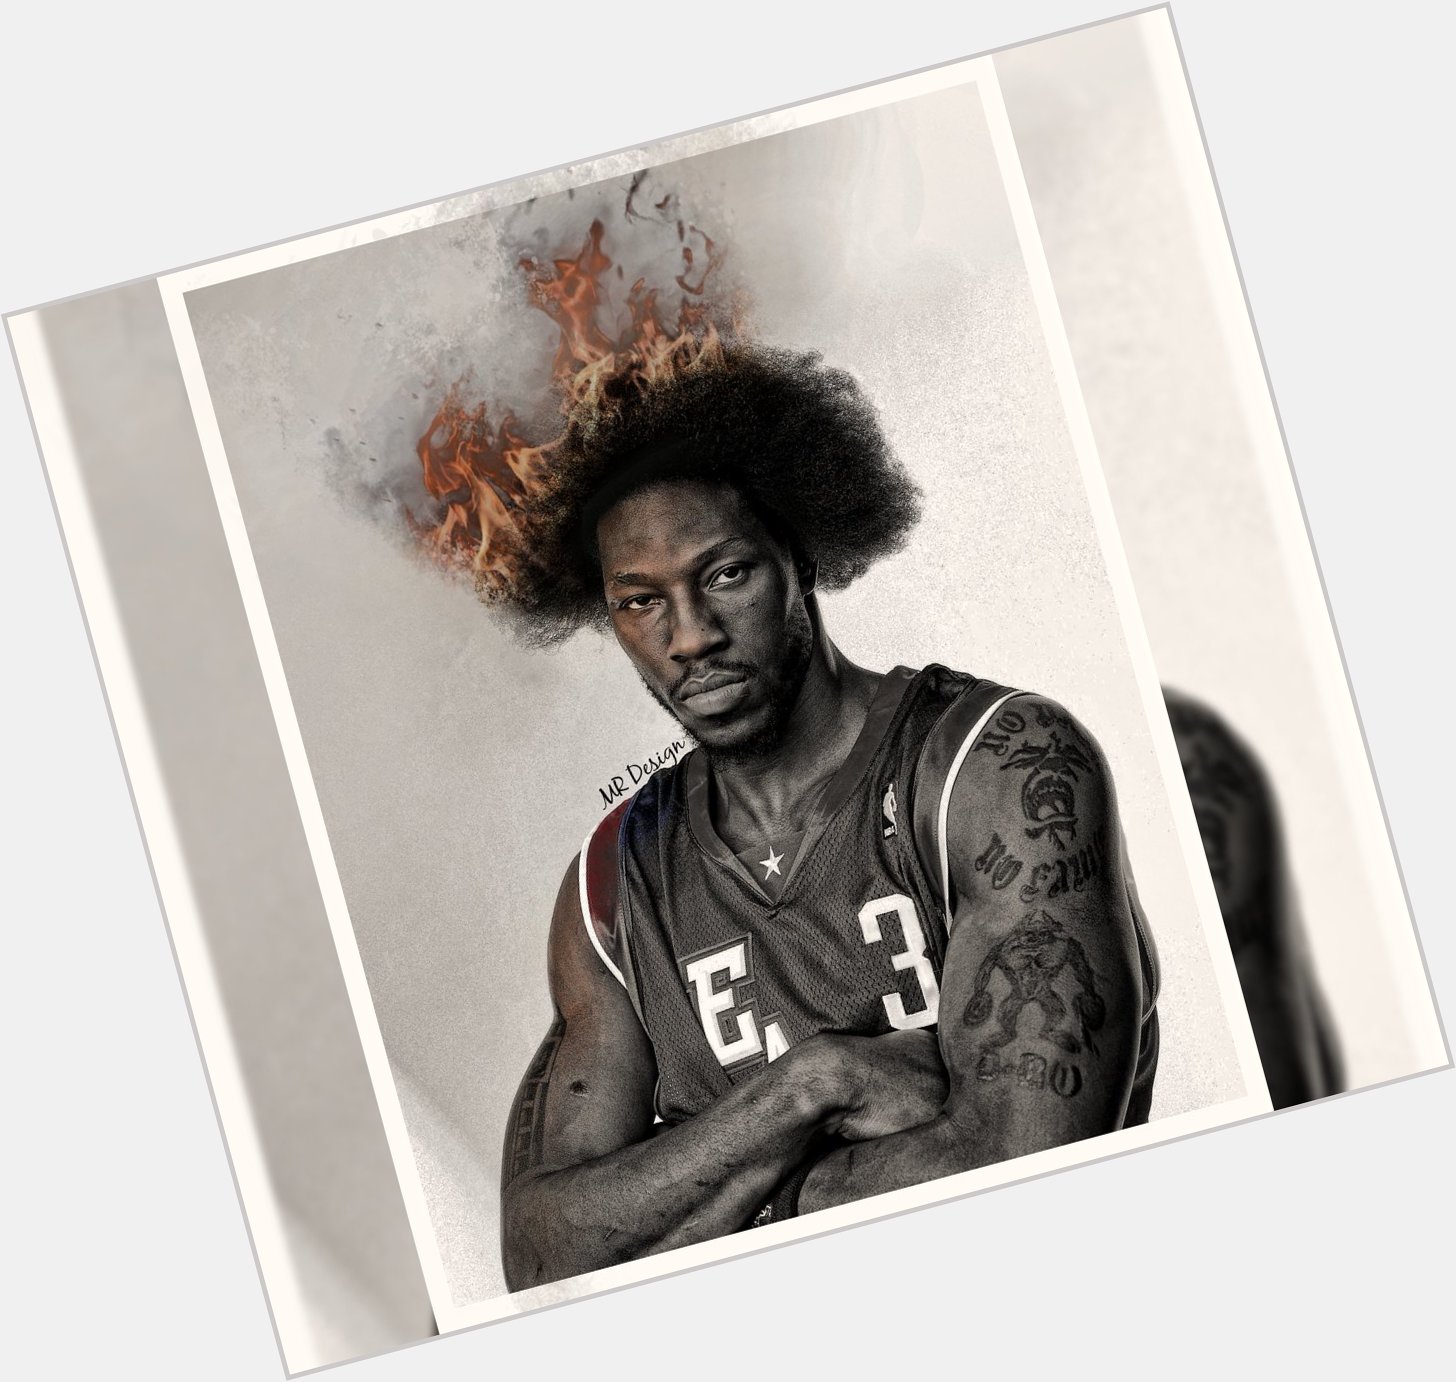 Happy Birthday to my favorite Piston of all-time.

A.K.A the greatest defender in NBA history.

Ben Wallace. 